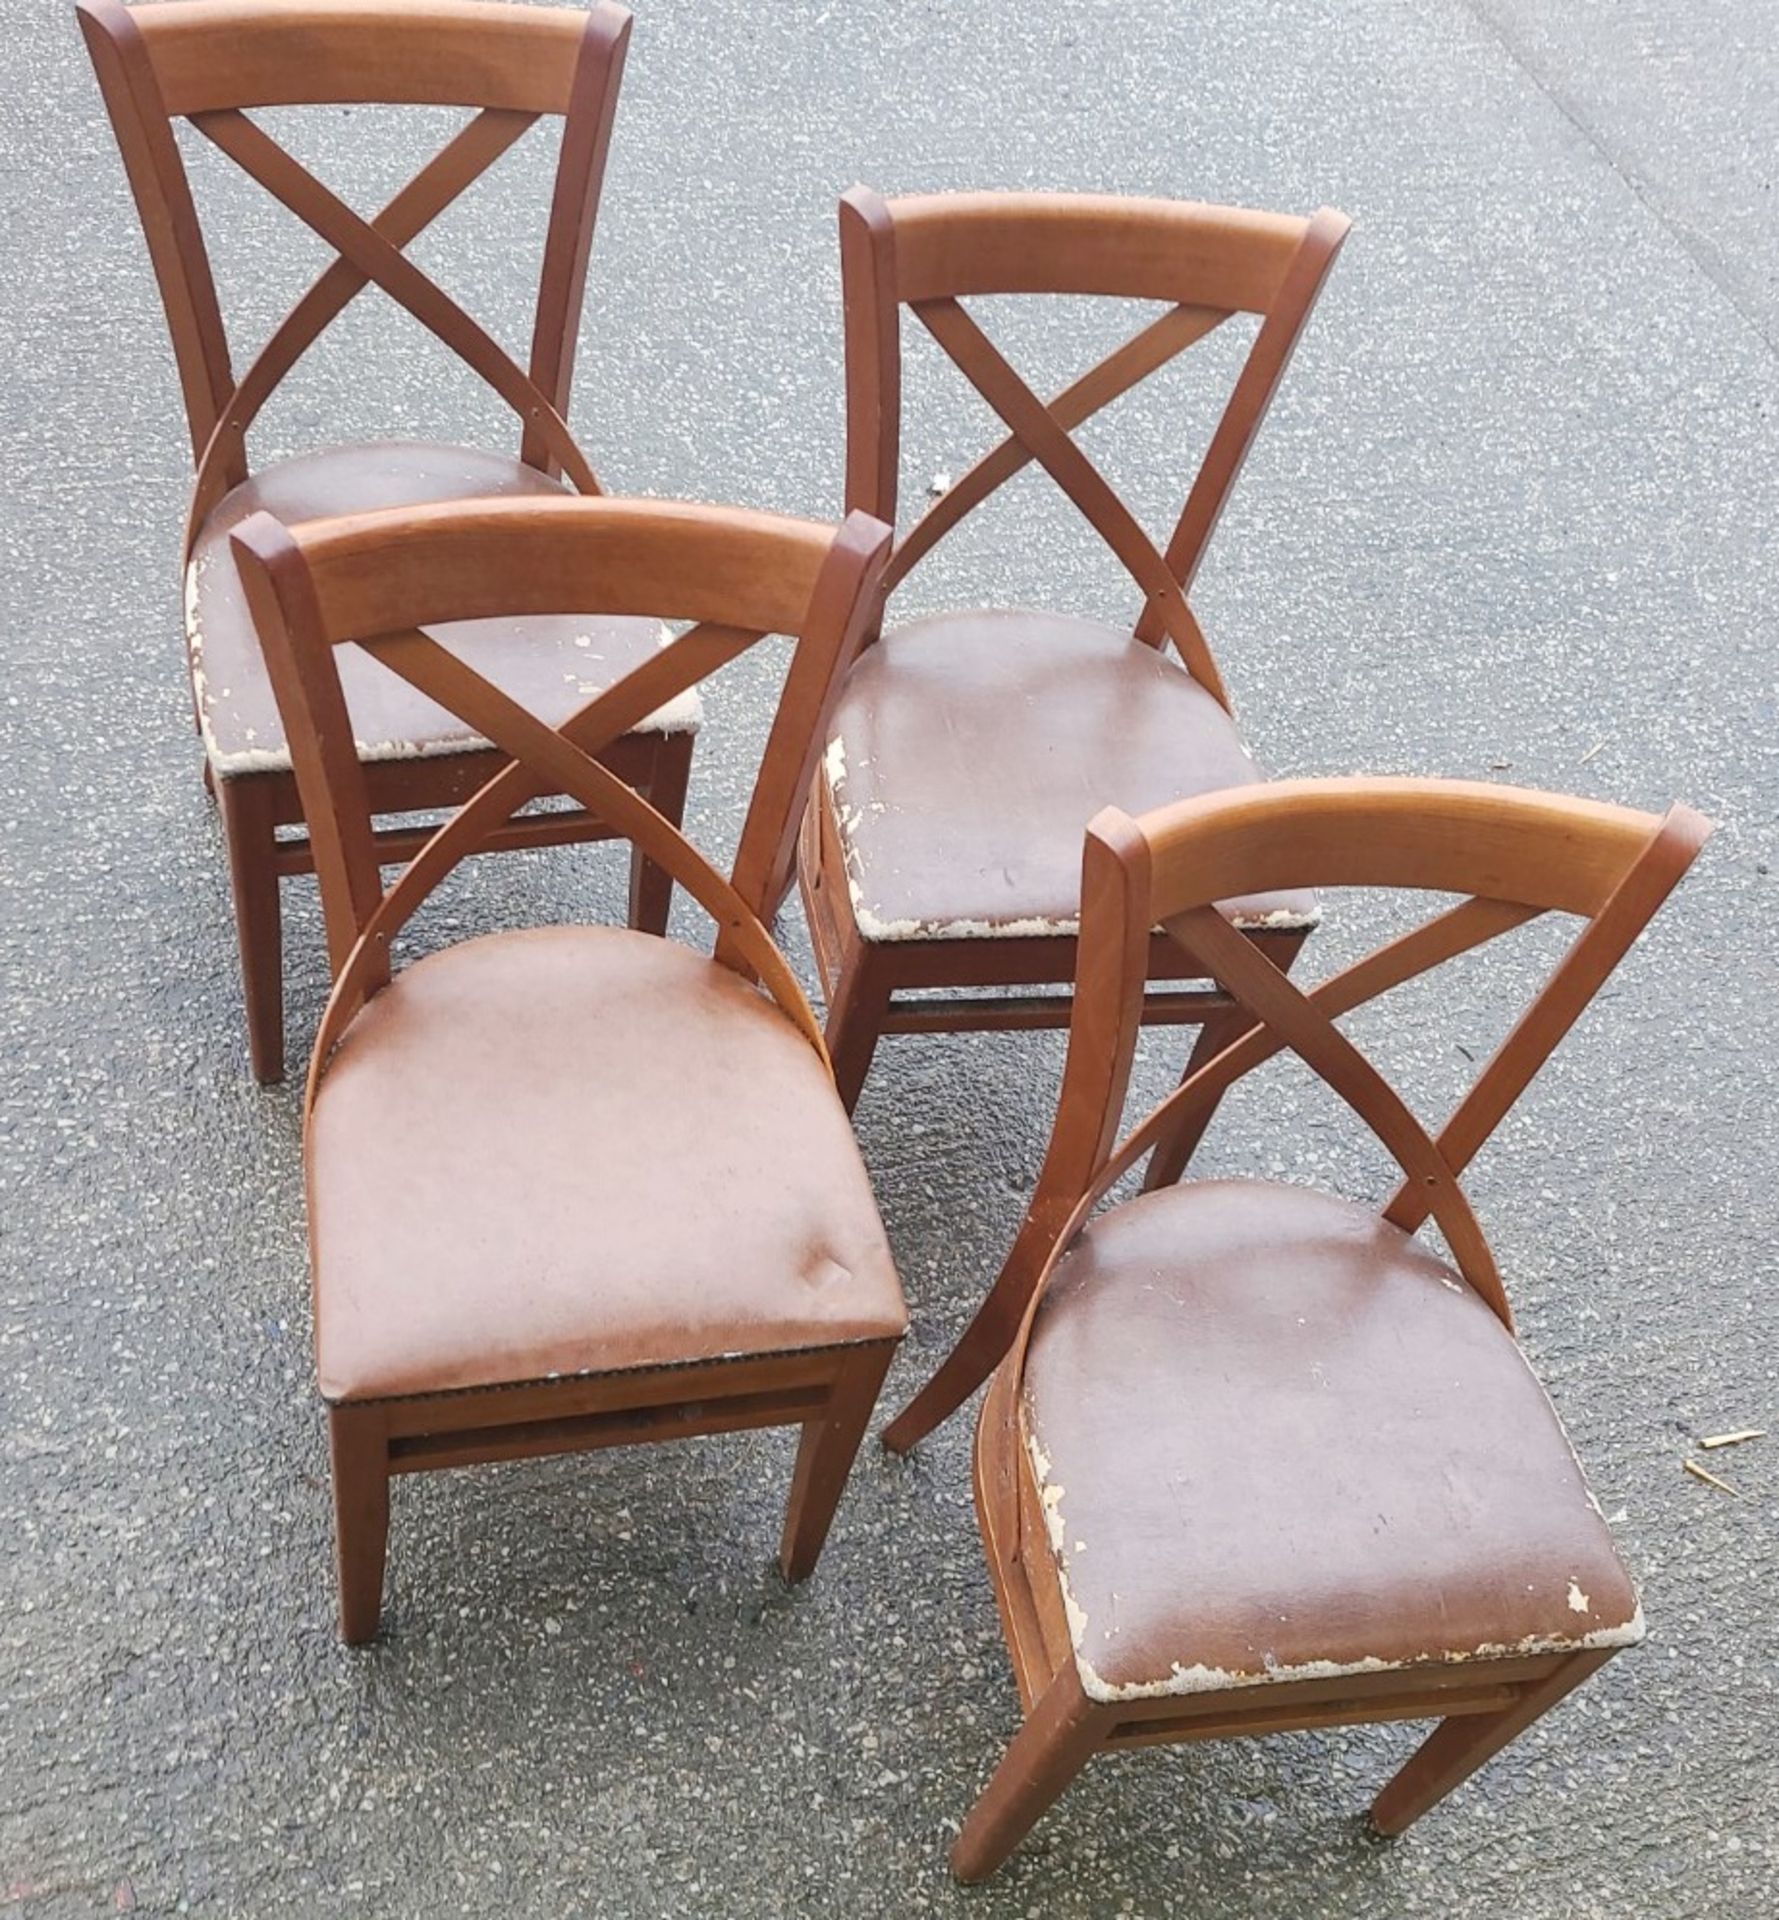 Set Of 4 x 'Leopold' Style Bentwood Side Chair In Walnut Stain & Faux Brown Leather Seat Cushion - Image 3 of 5